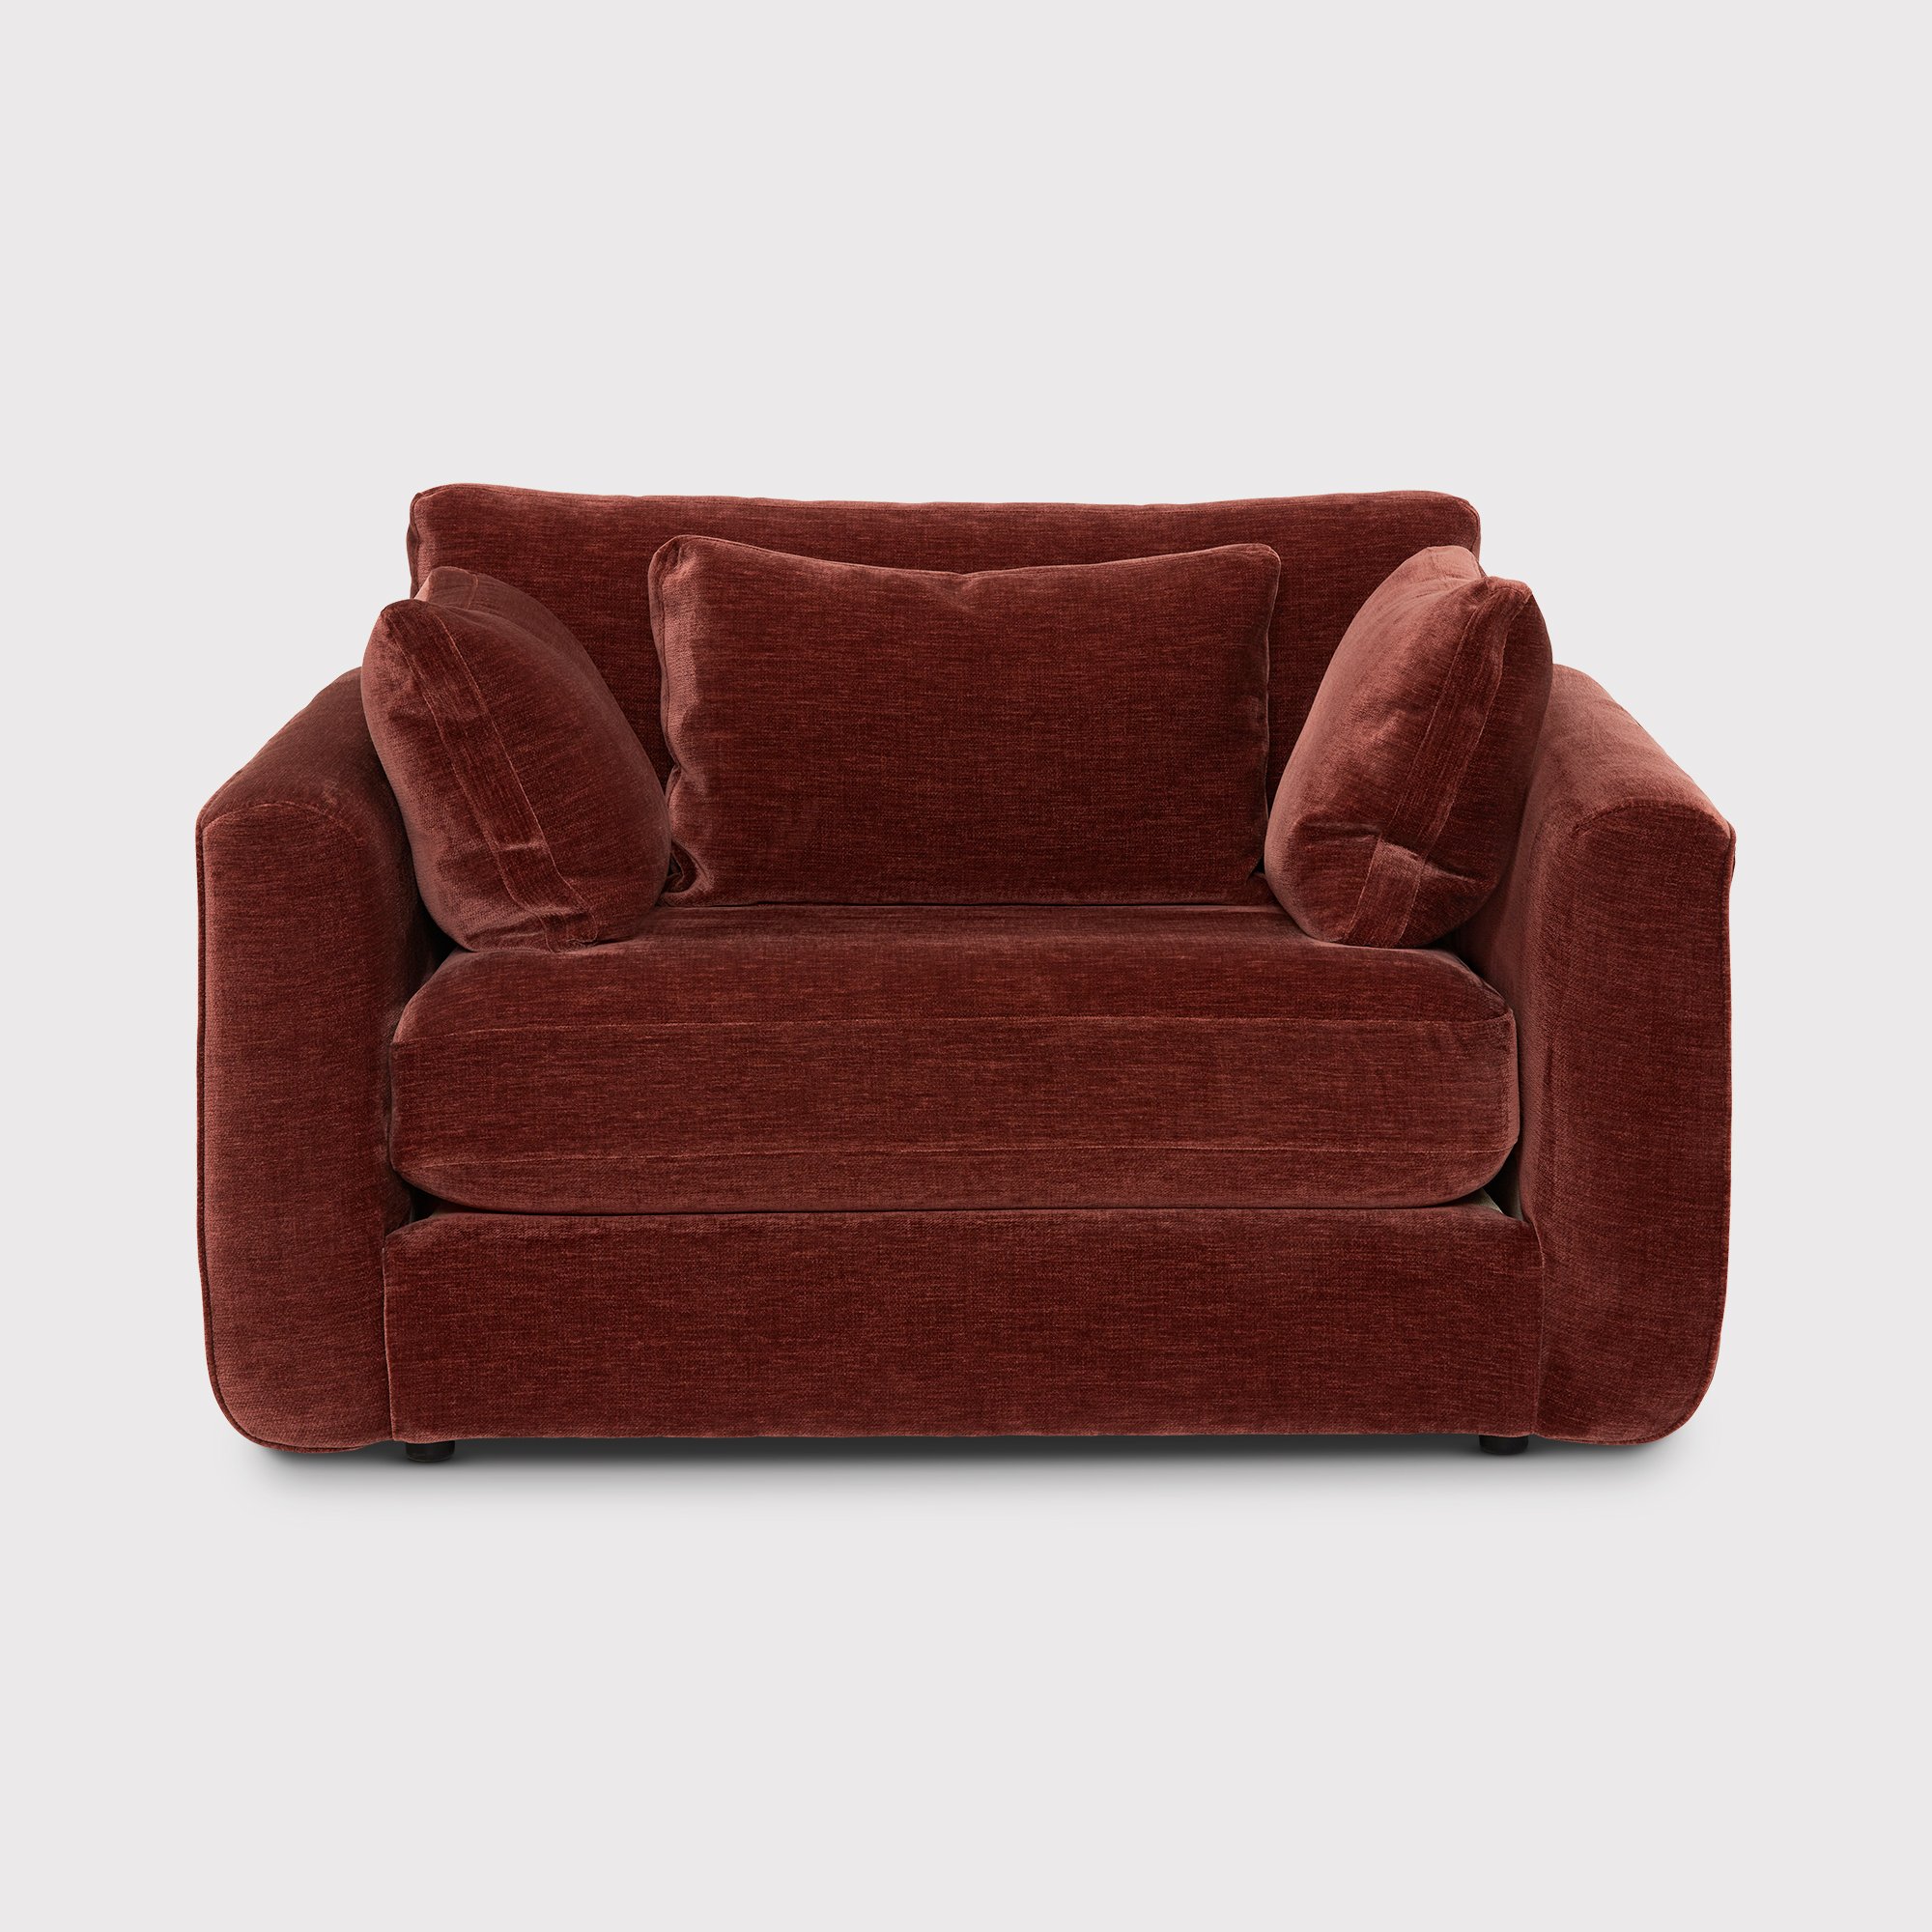 Fable Loveseat Sofa, Red Fabric | Barker & Stonehouse